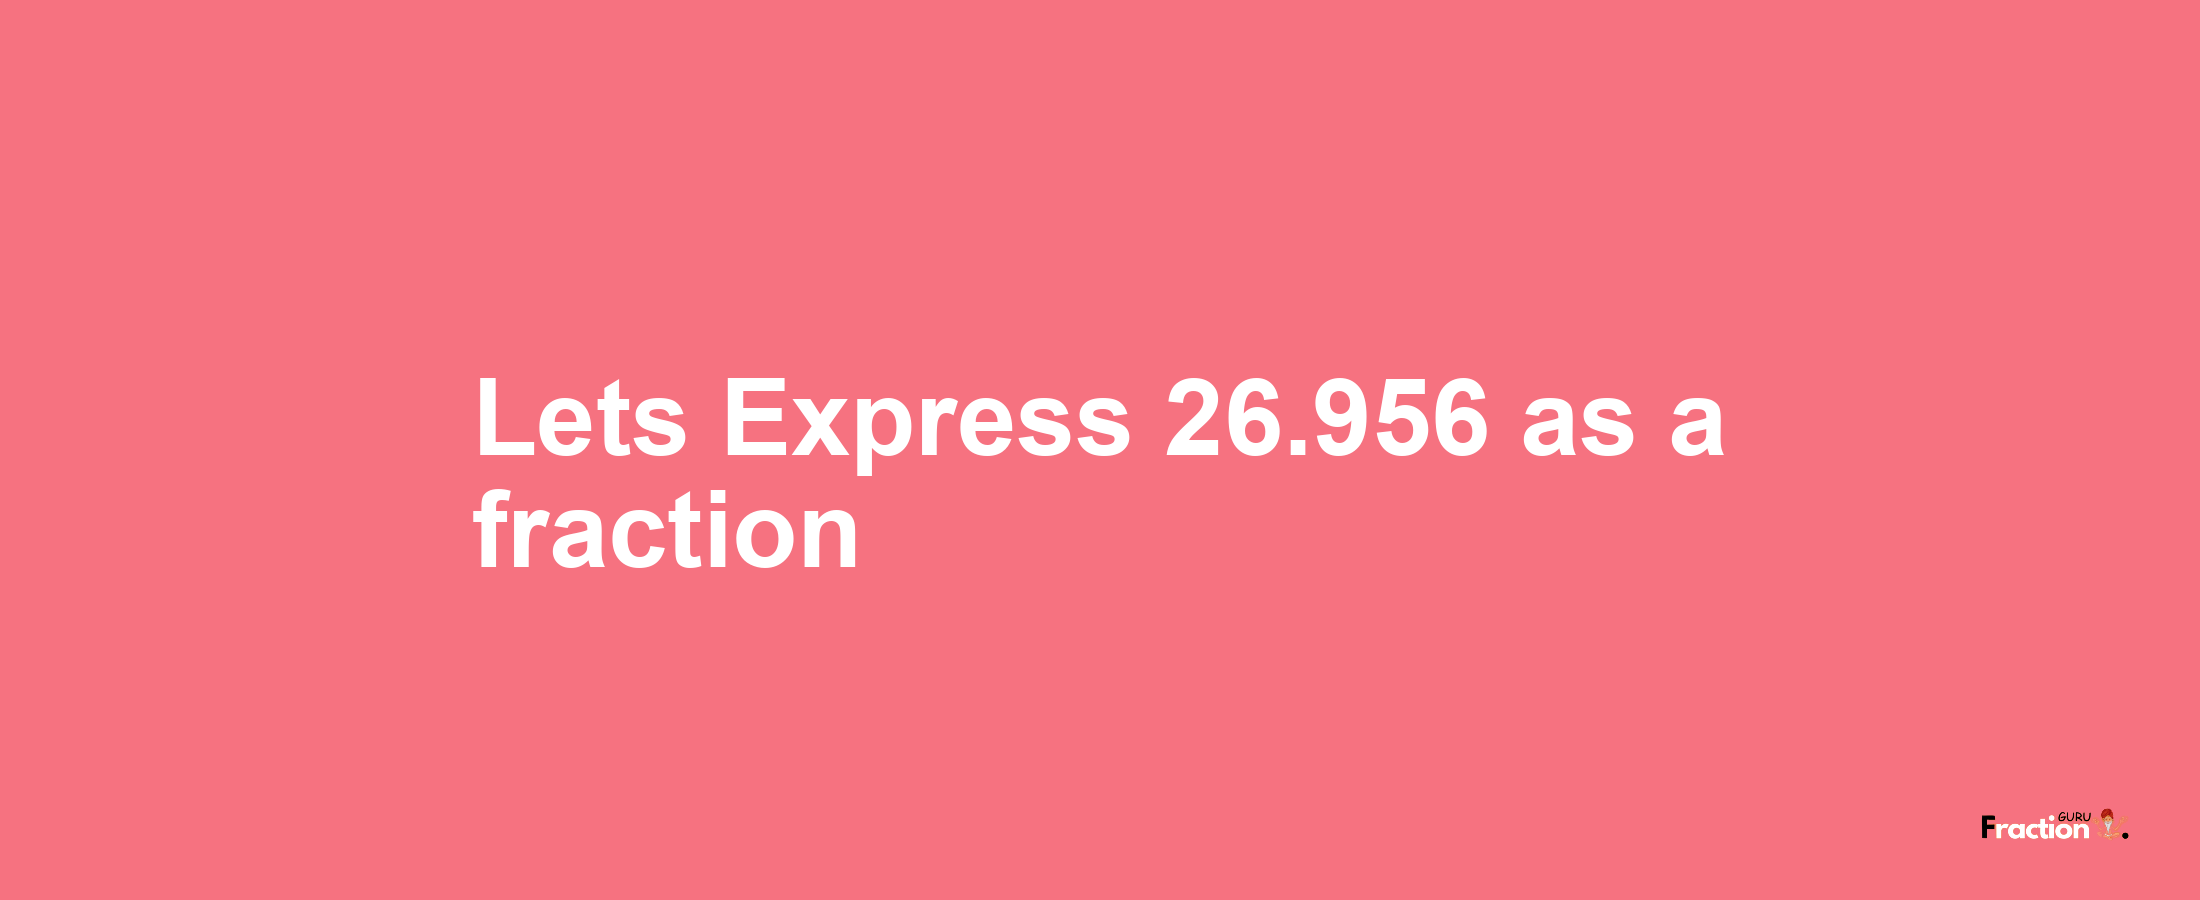 Lets Express 26.956 as afraction